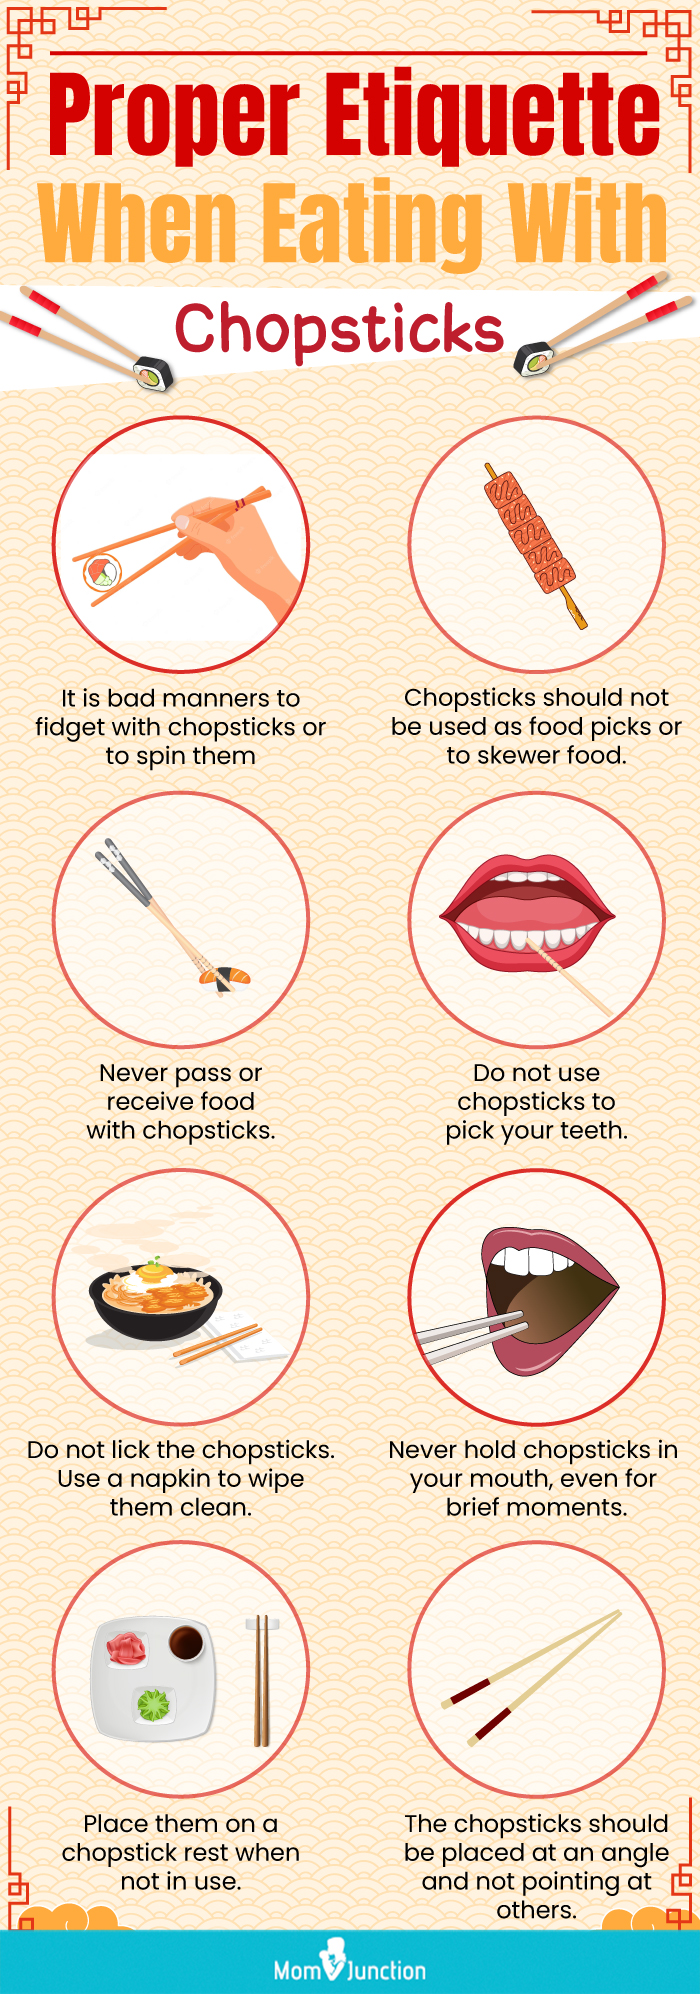 Proper Etiquette When Eating With Chopsticks copy (infographic)